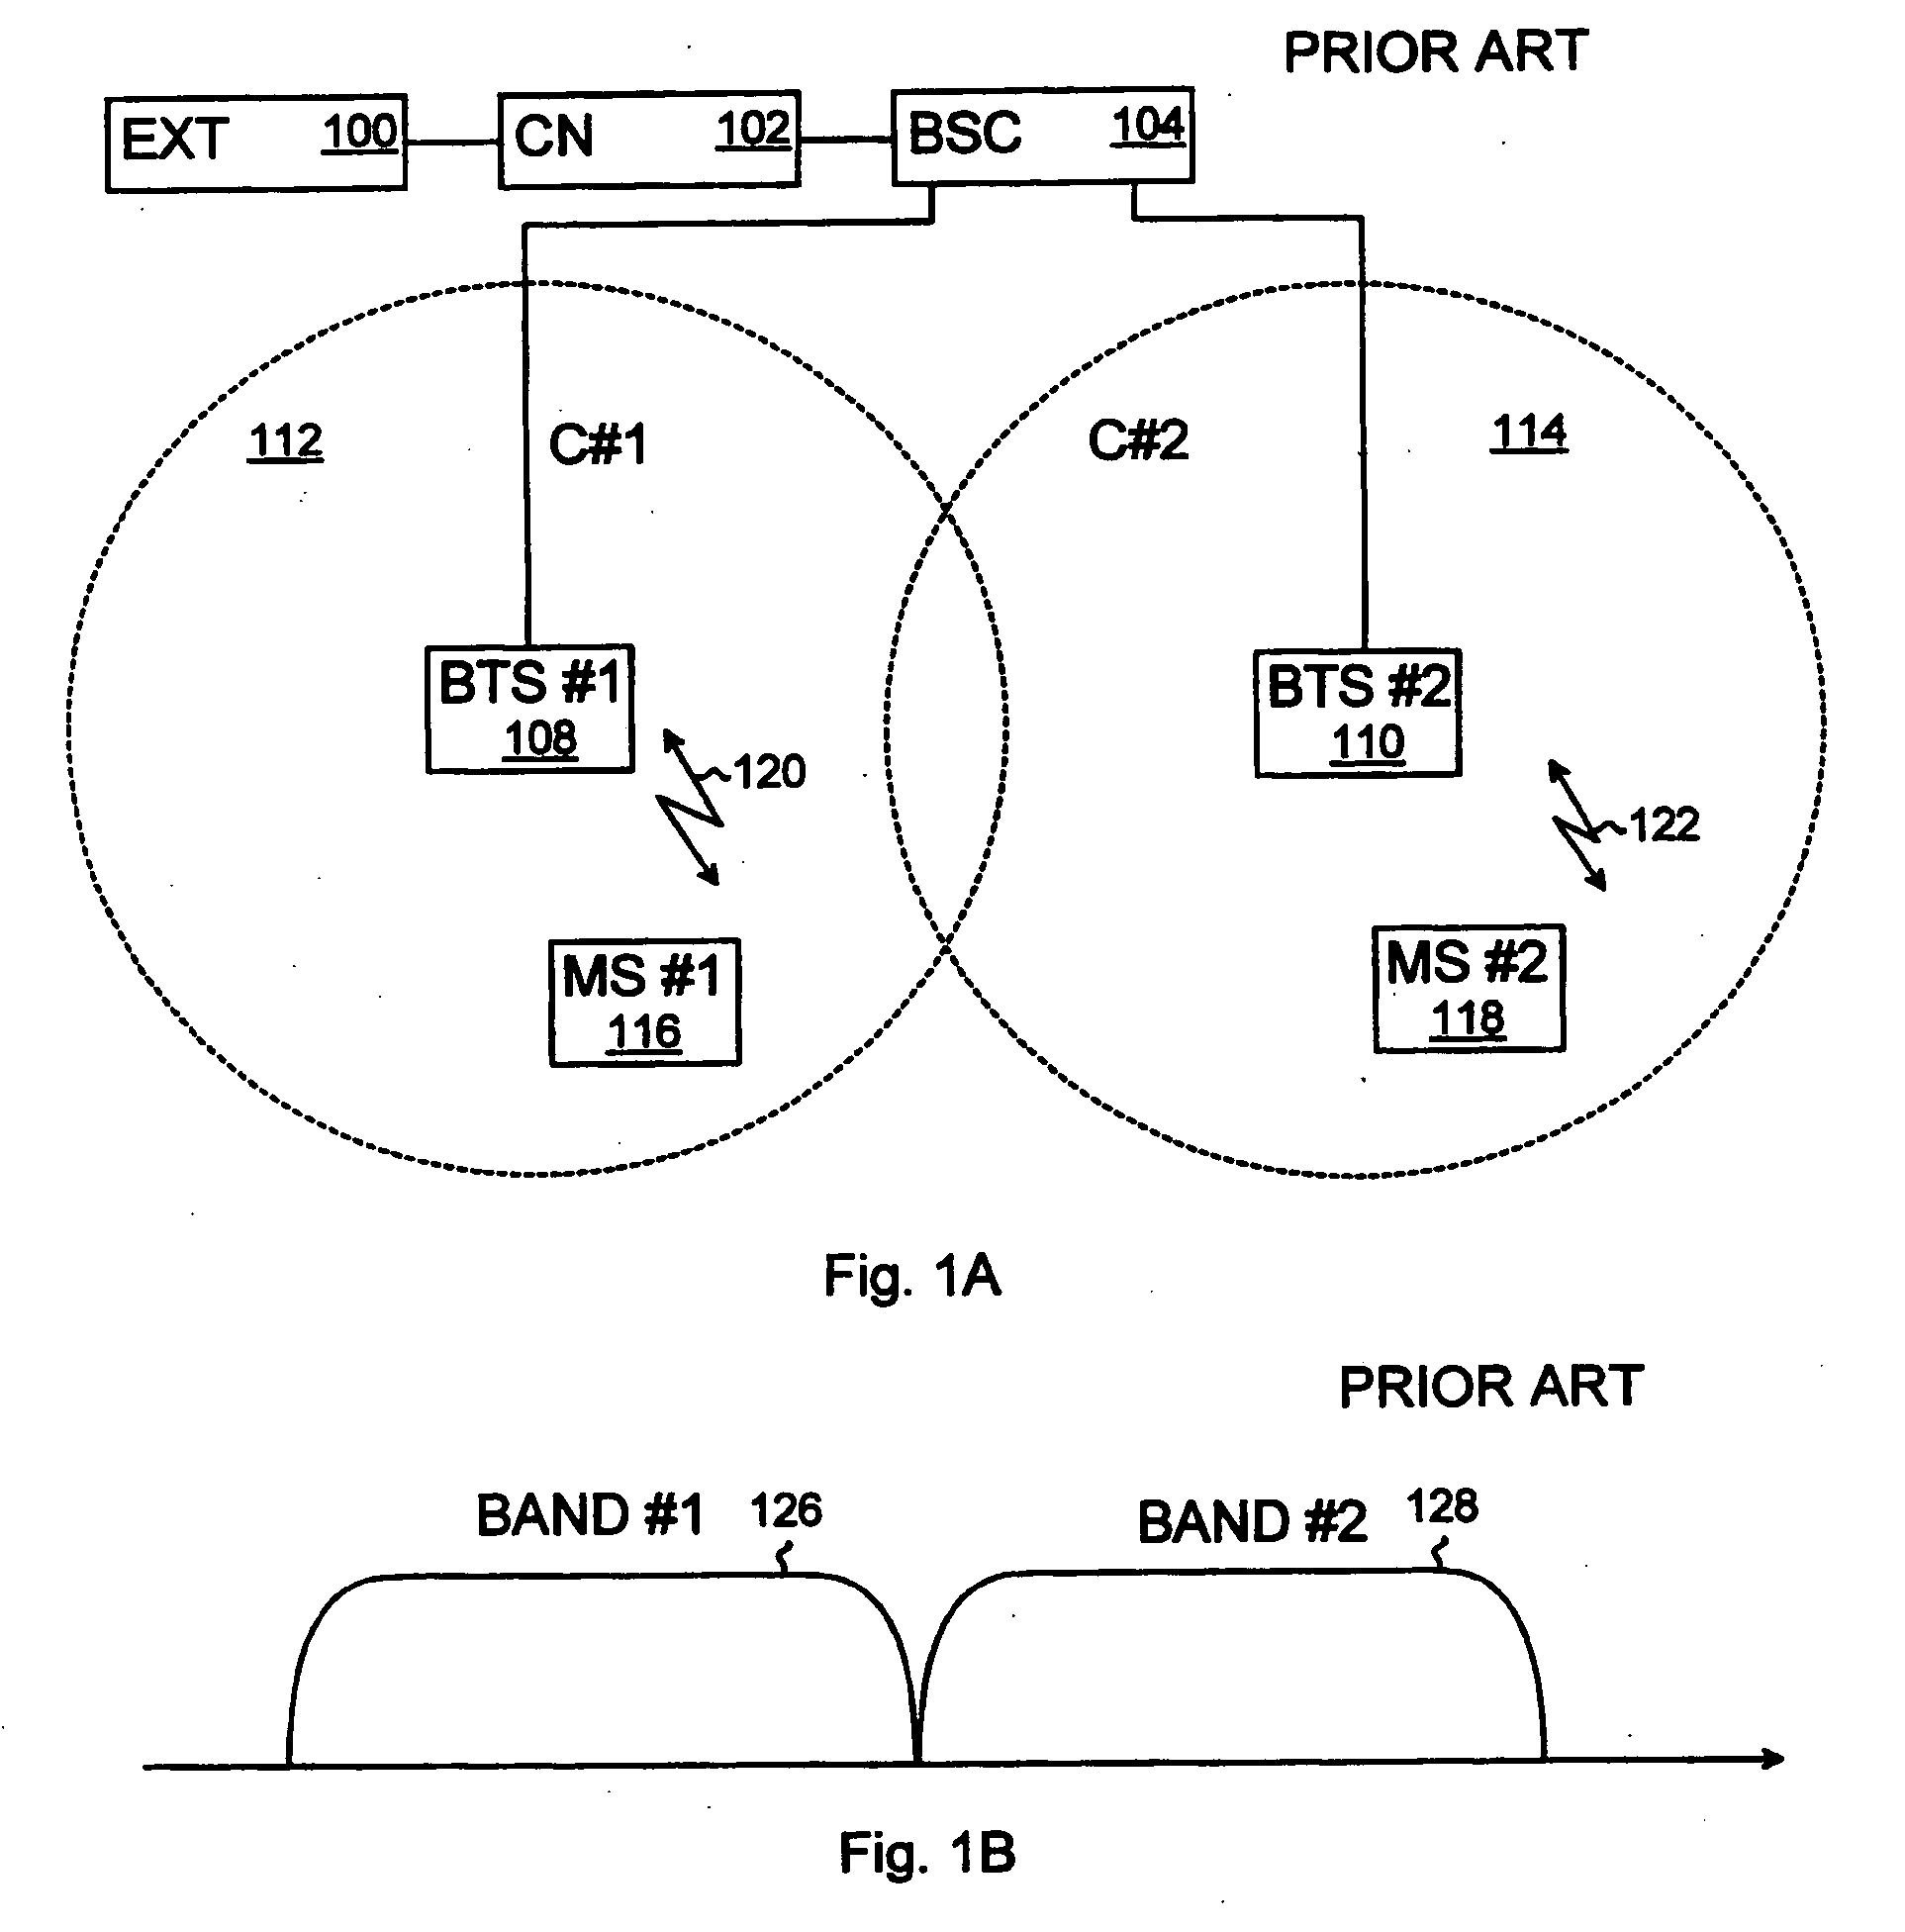 Method, system, and computer program for allocating radio resources in TDMA cellular telecommunications system